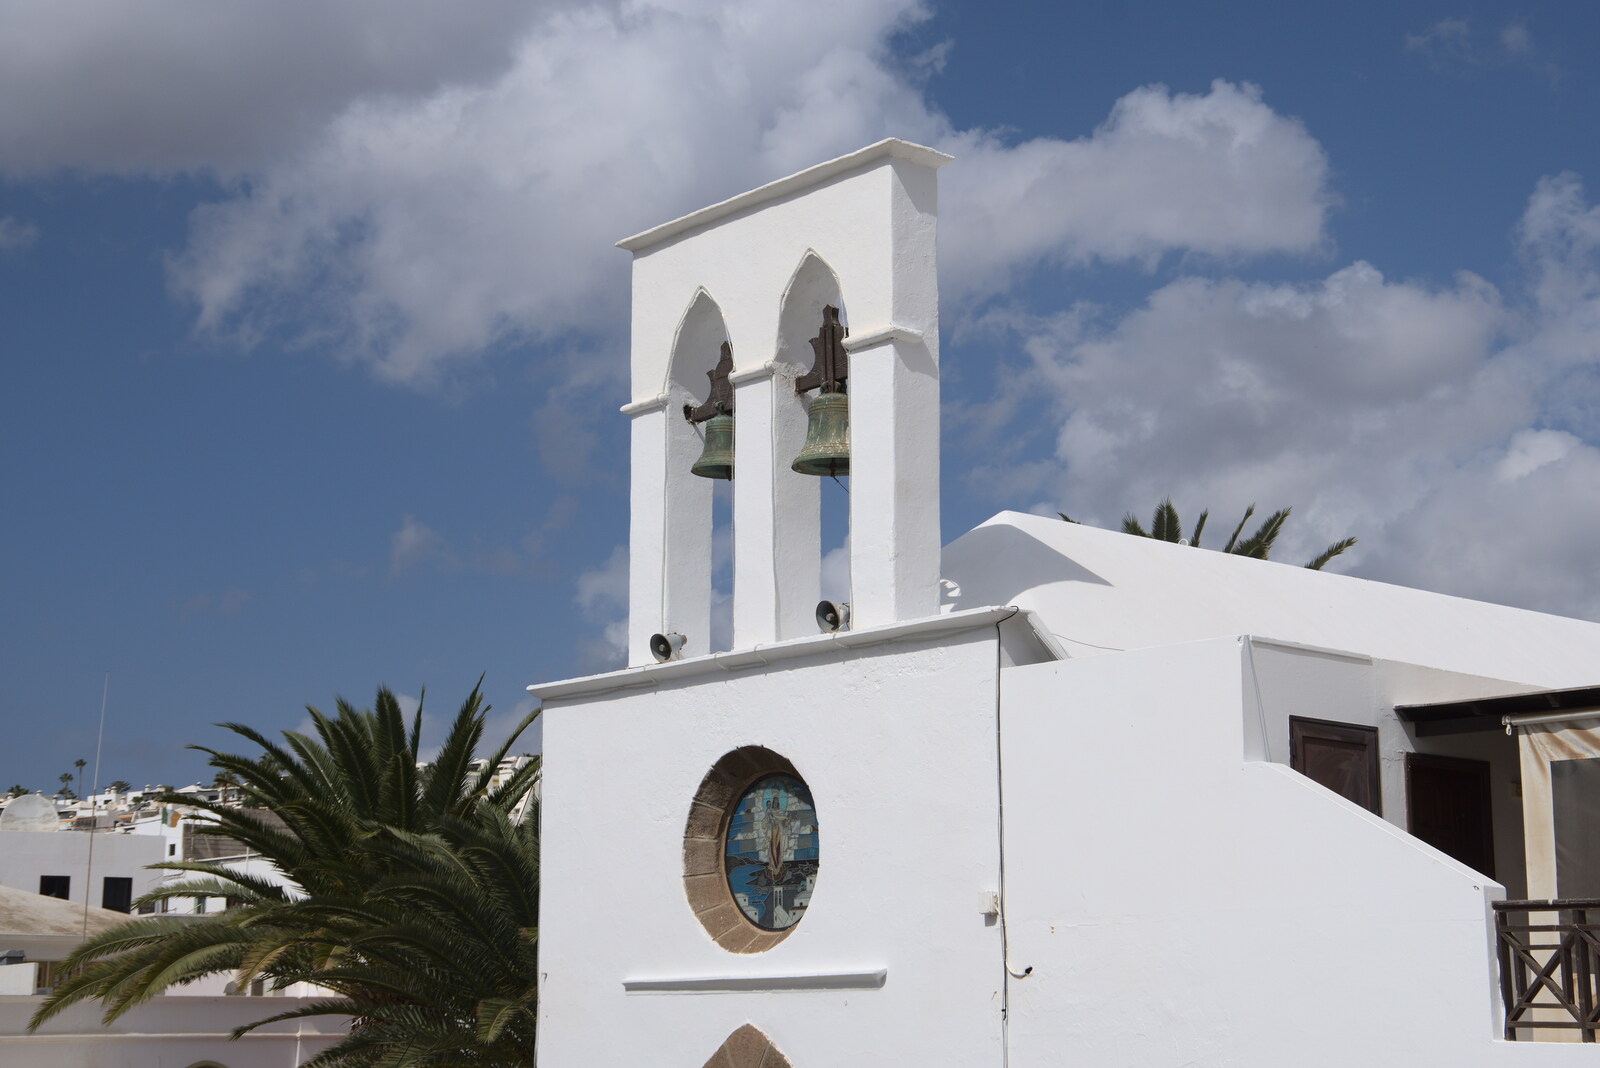 An actually old building from Five Days in Lanzarote, Canary Islands, Spain - 24th October 2021